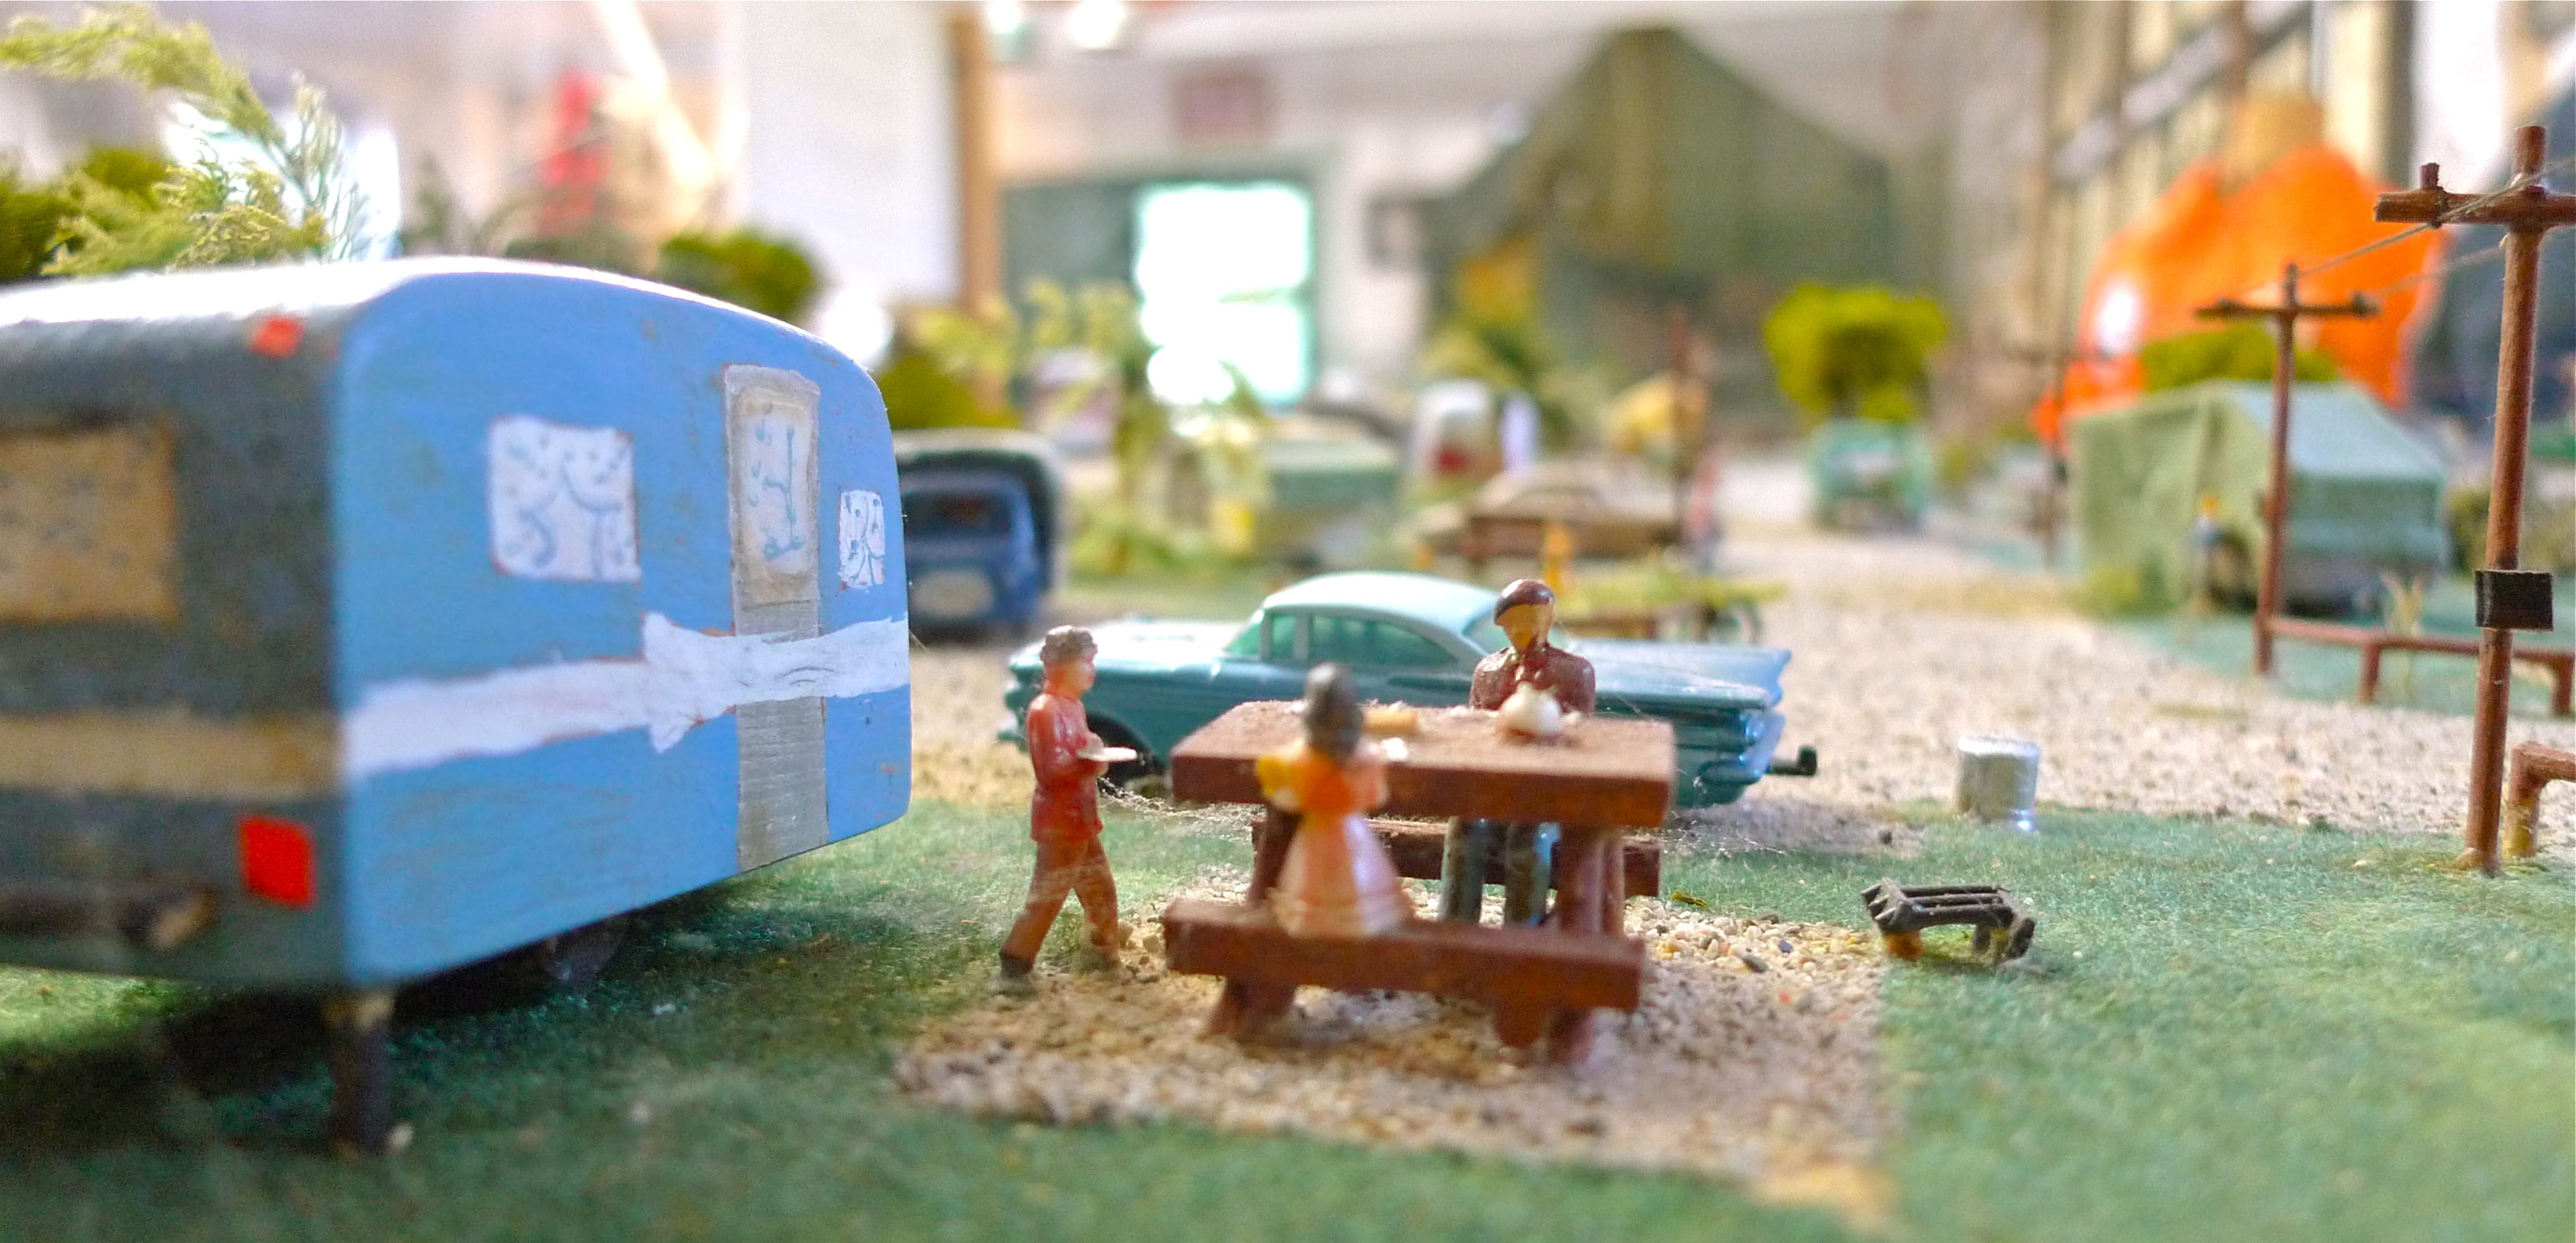 This diorama of an ideal American campground was once featured at a camping tradeshow in the 1960s and had been on display at the Museum of Family Camping.